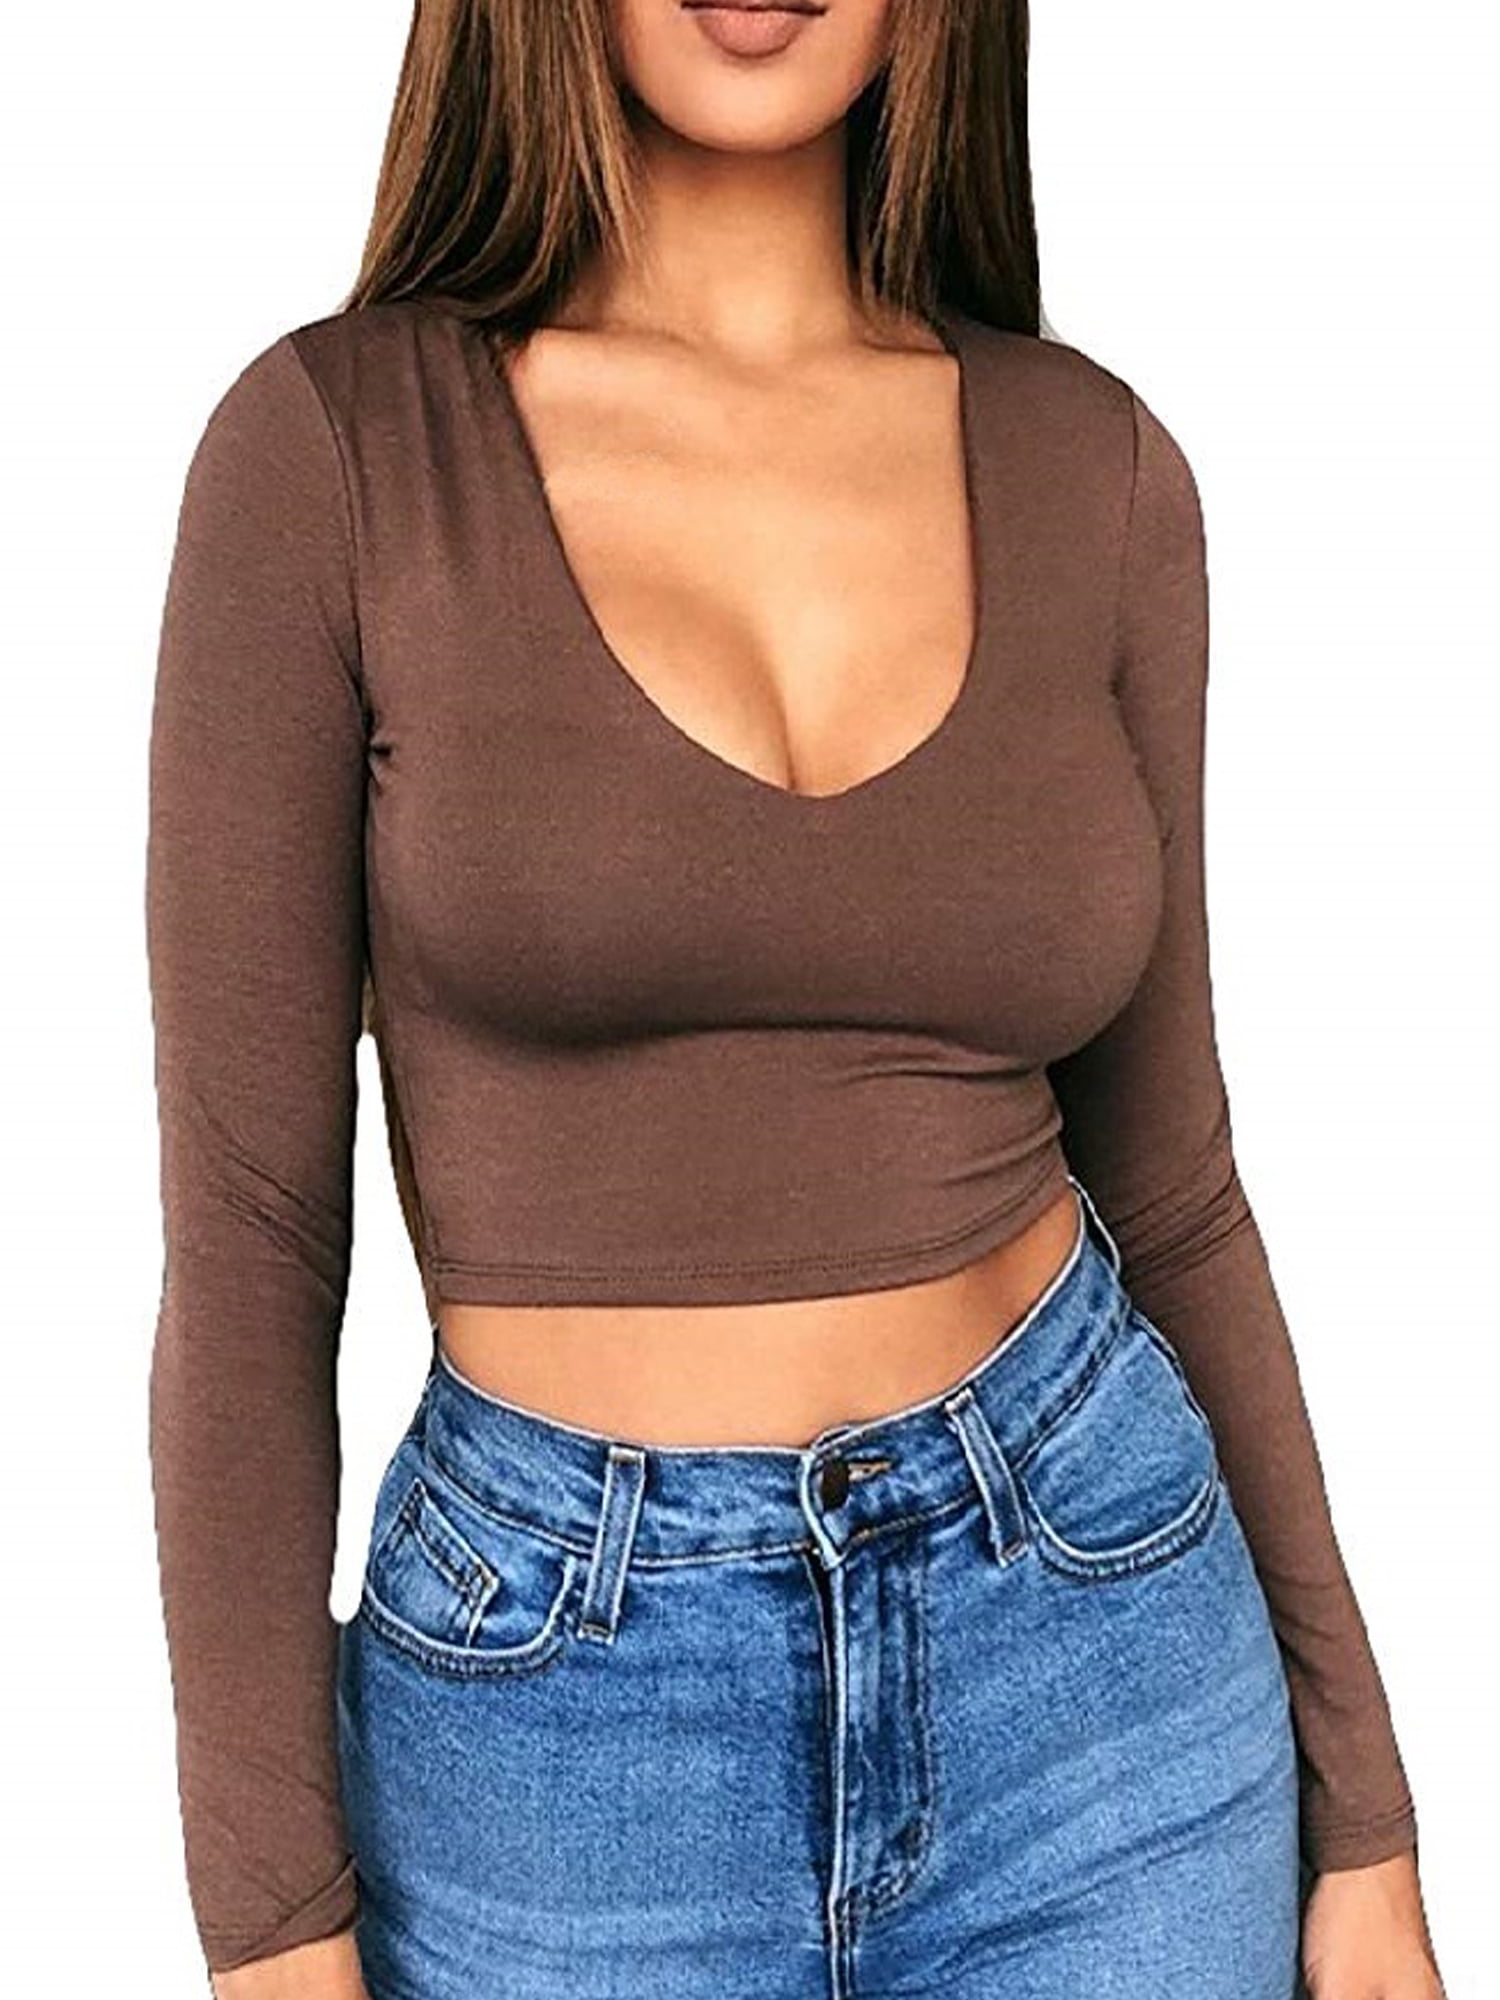 NE PEOPLE Womens Solid Long Sleeve Scoop Neck Fitted Crop Top 14 Colors NEWT19 